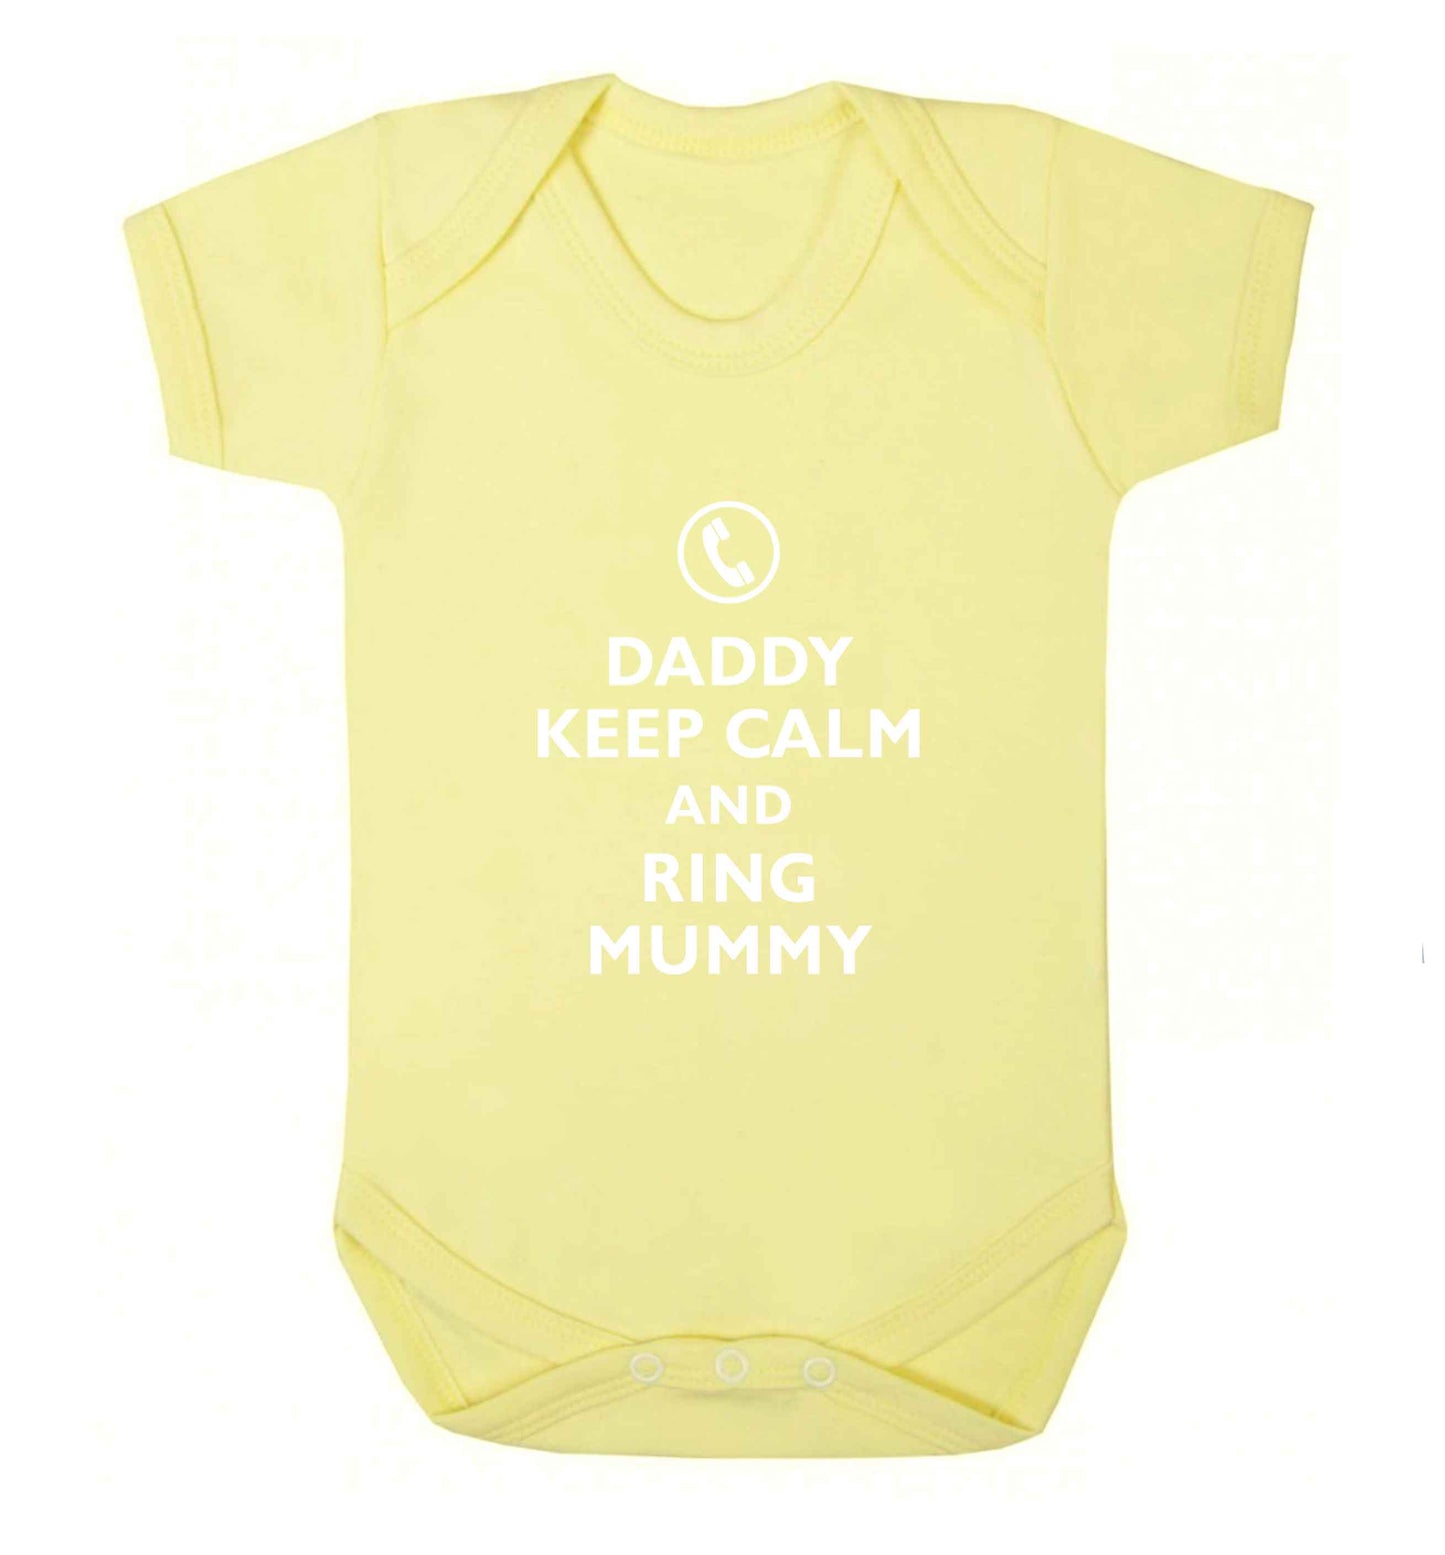 Daddy keep calm and ring mummy baby vest pale yellow 18-24 months